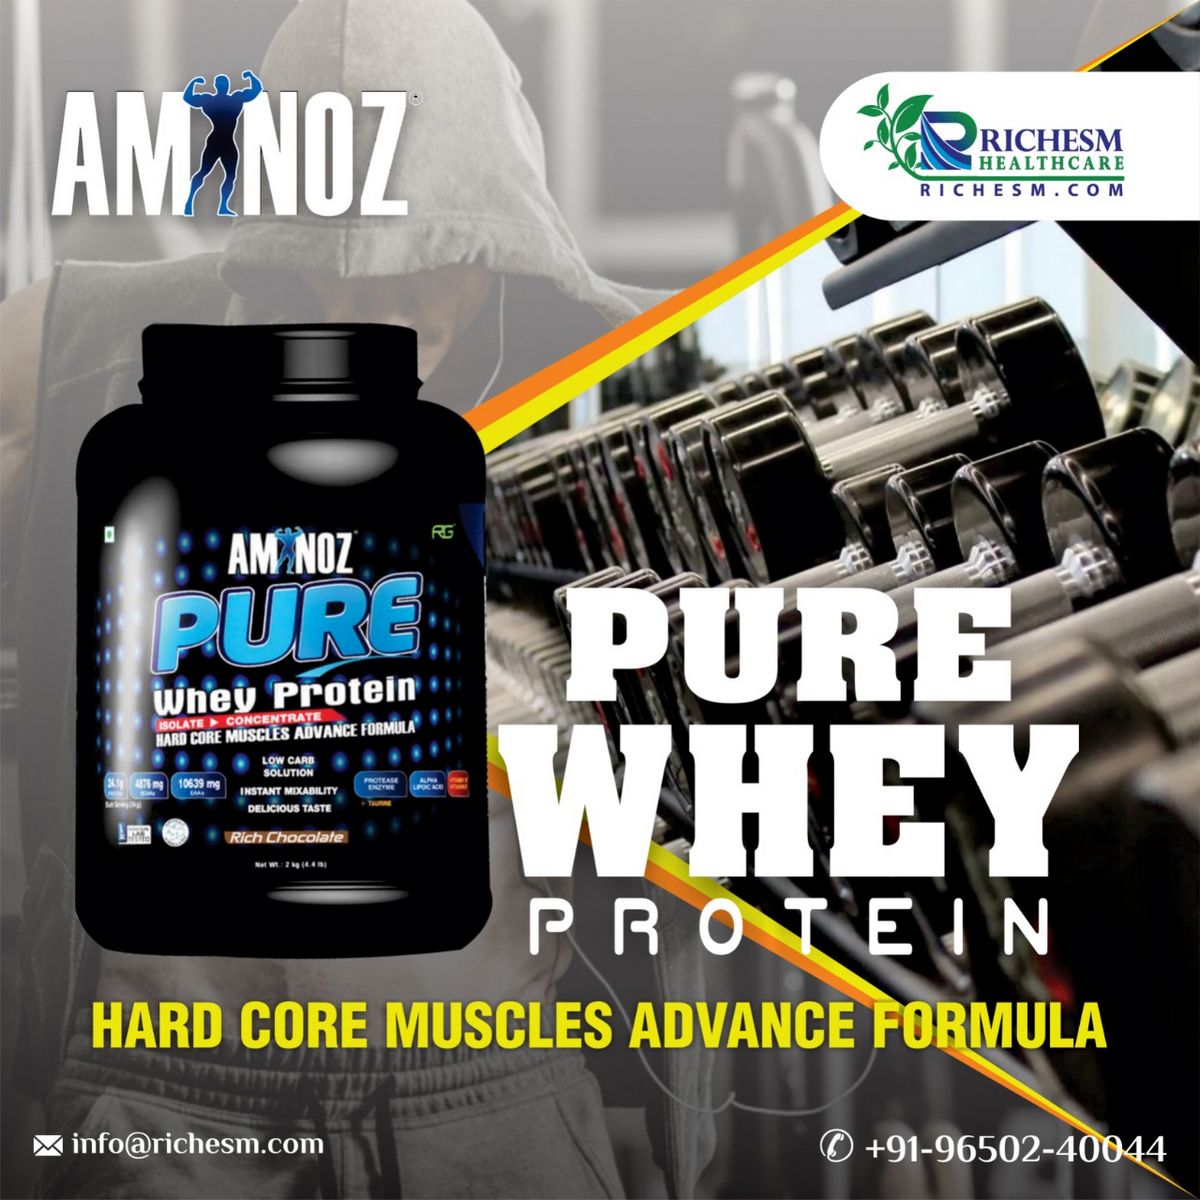 Advance Whey Protein to Build Muscles Fast